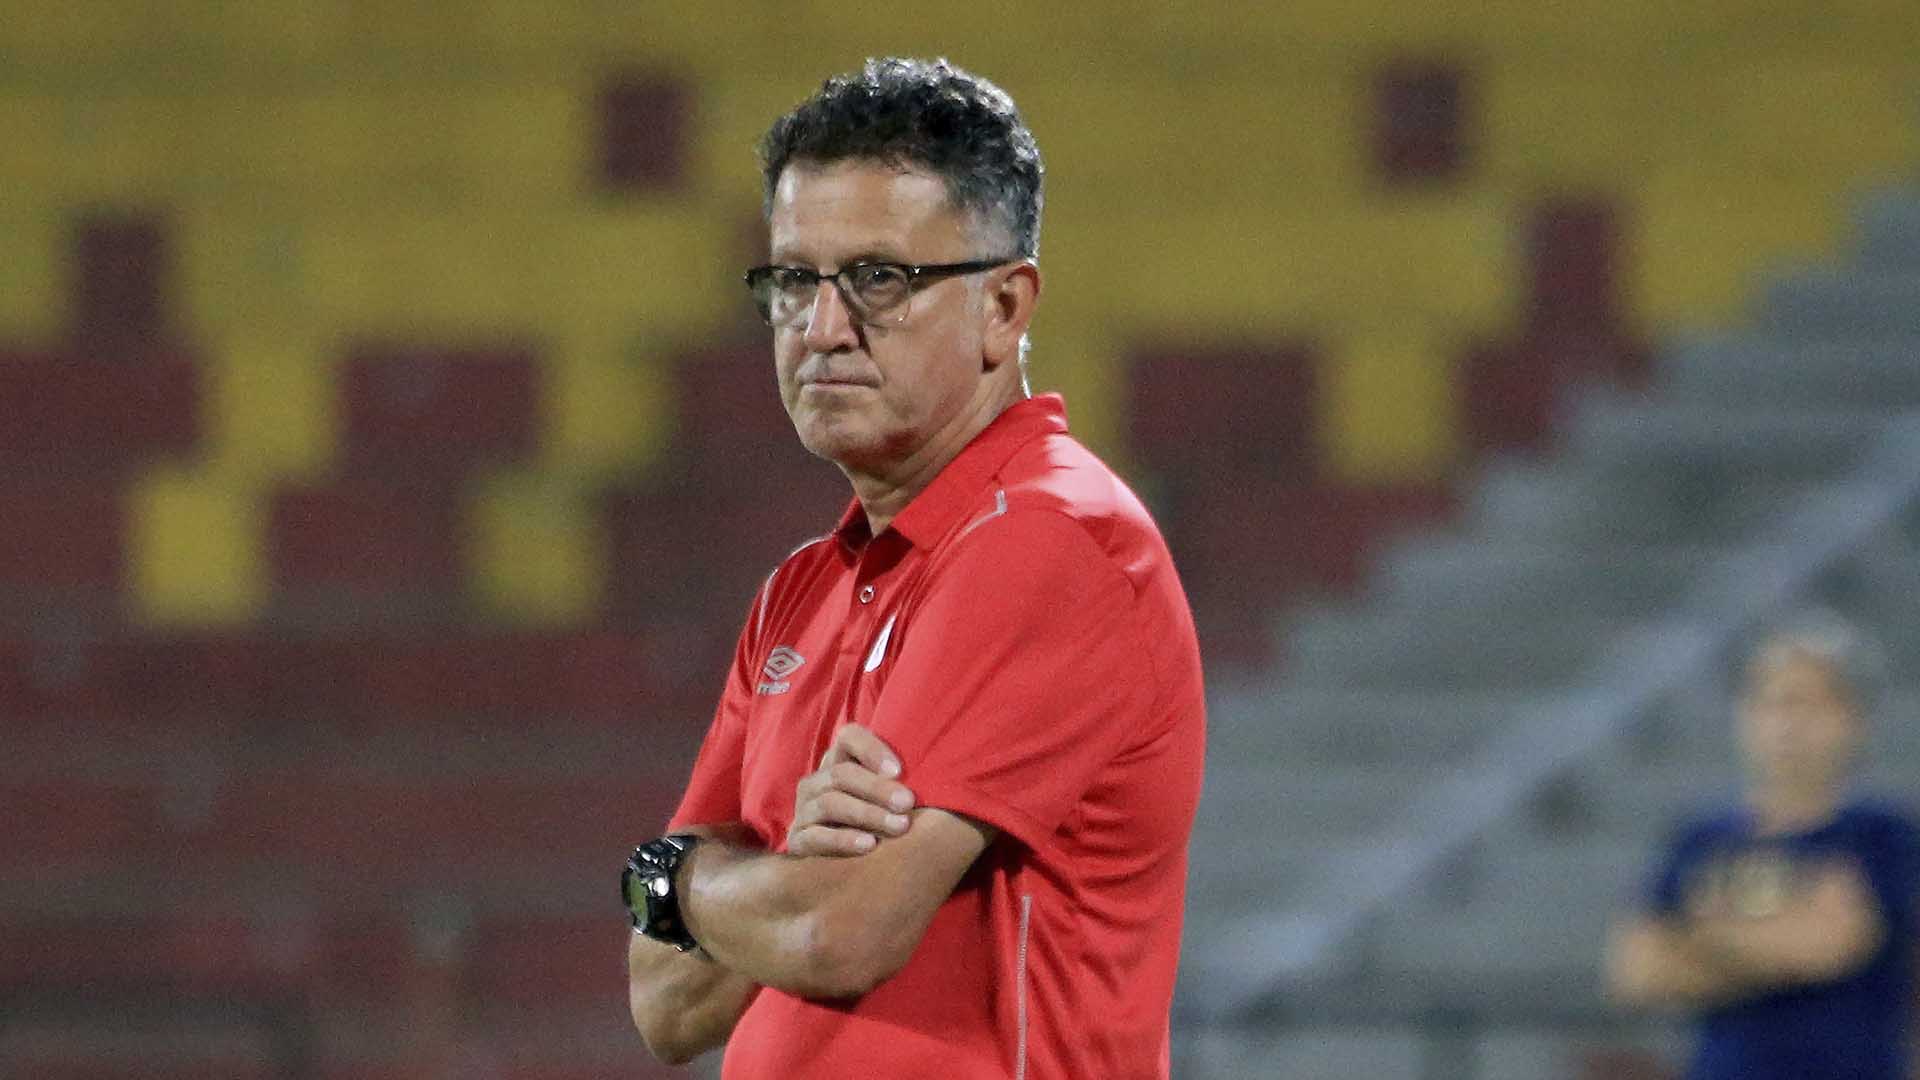 Osorio pointed to three U.S. players after the league defeat